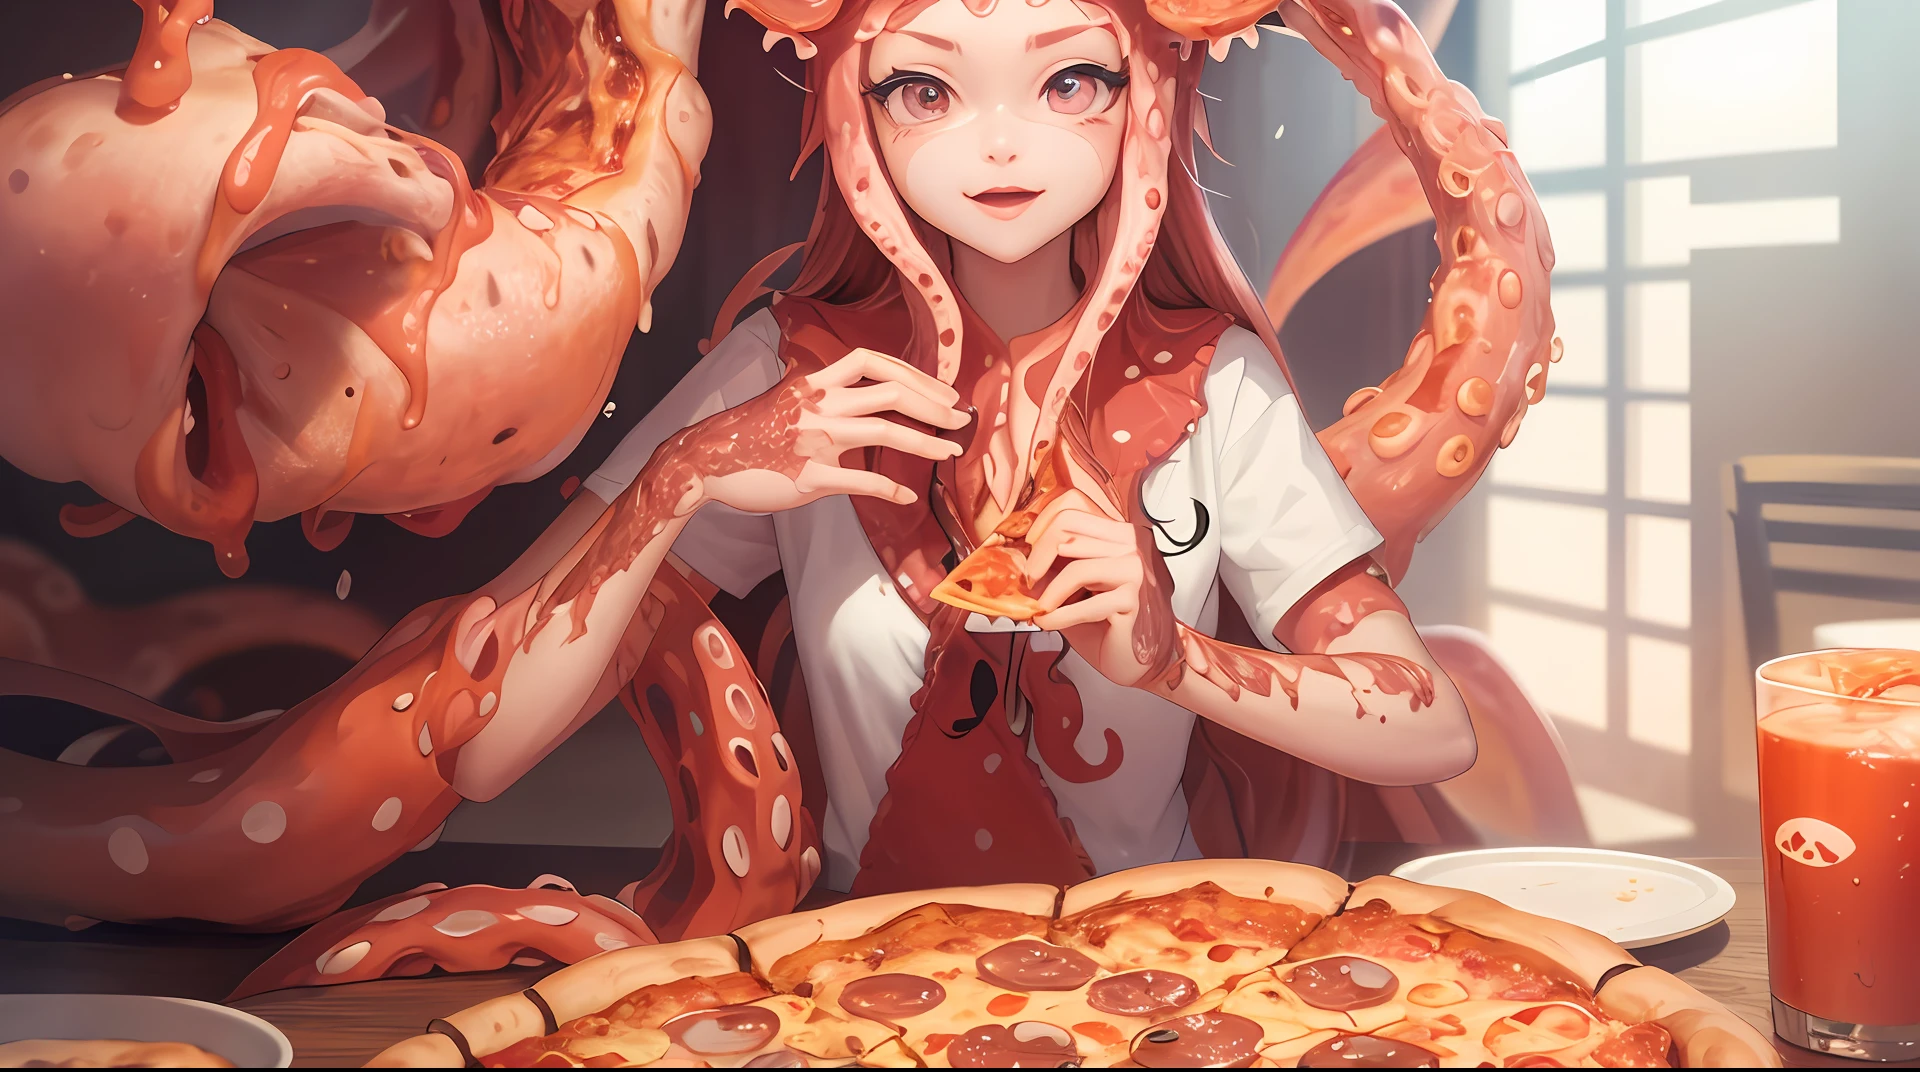 beste Qualität，Pizza，Tentakel des Terrors，there is a woman sitting at a table with a Pizza and octopus tentacles, munching Pizza, eating Pizza, Tentakeln um Burger gewickelt, Pizza!, Tentakeln um, presenting Pizza, humanoides rosa weibliches Tintenfischmädchen, eating a Pizza, Anime-Essen, detaillierte digitale Anime-Kunst, Pizza, erstaunliche Essensillustration, sharing a Pizza, einige Tentakeln berühren sie